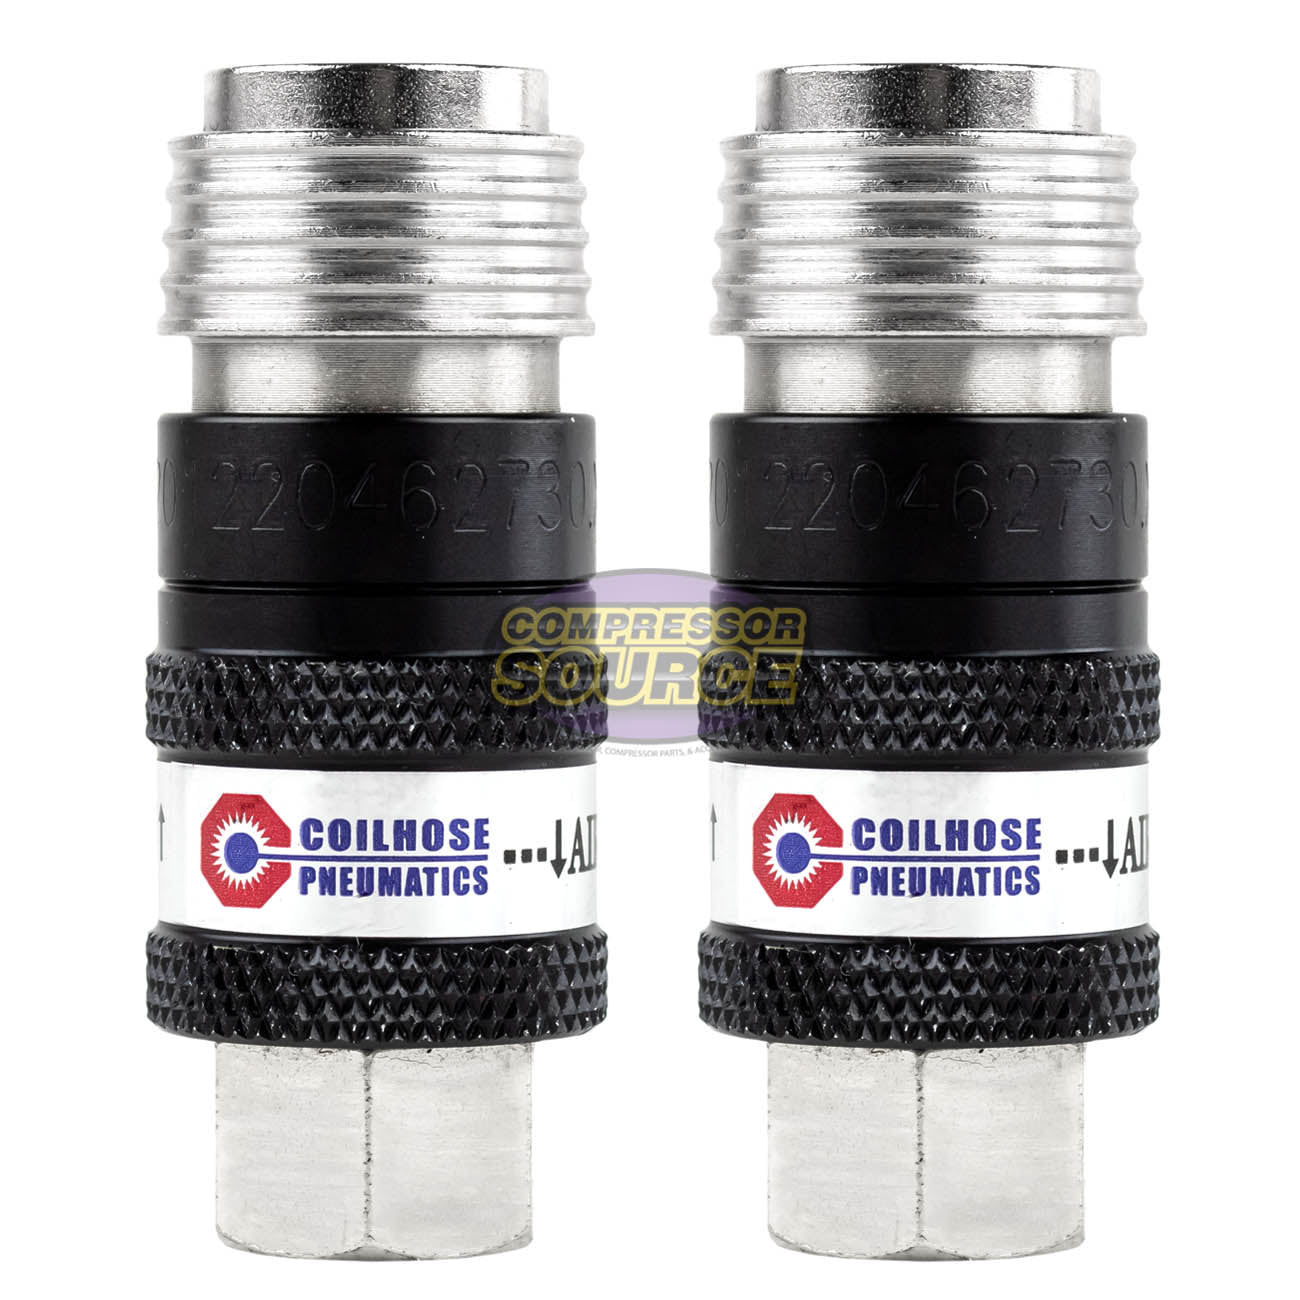 Coilhose 5 in 1 Automatic Safety Exhaust Coupler 1/4" Body x 1/4" FNPT 2 Pack